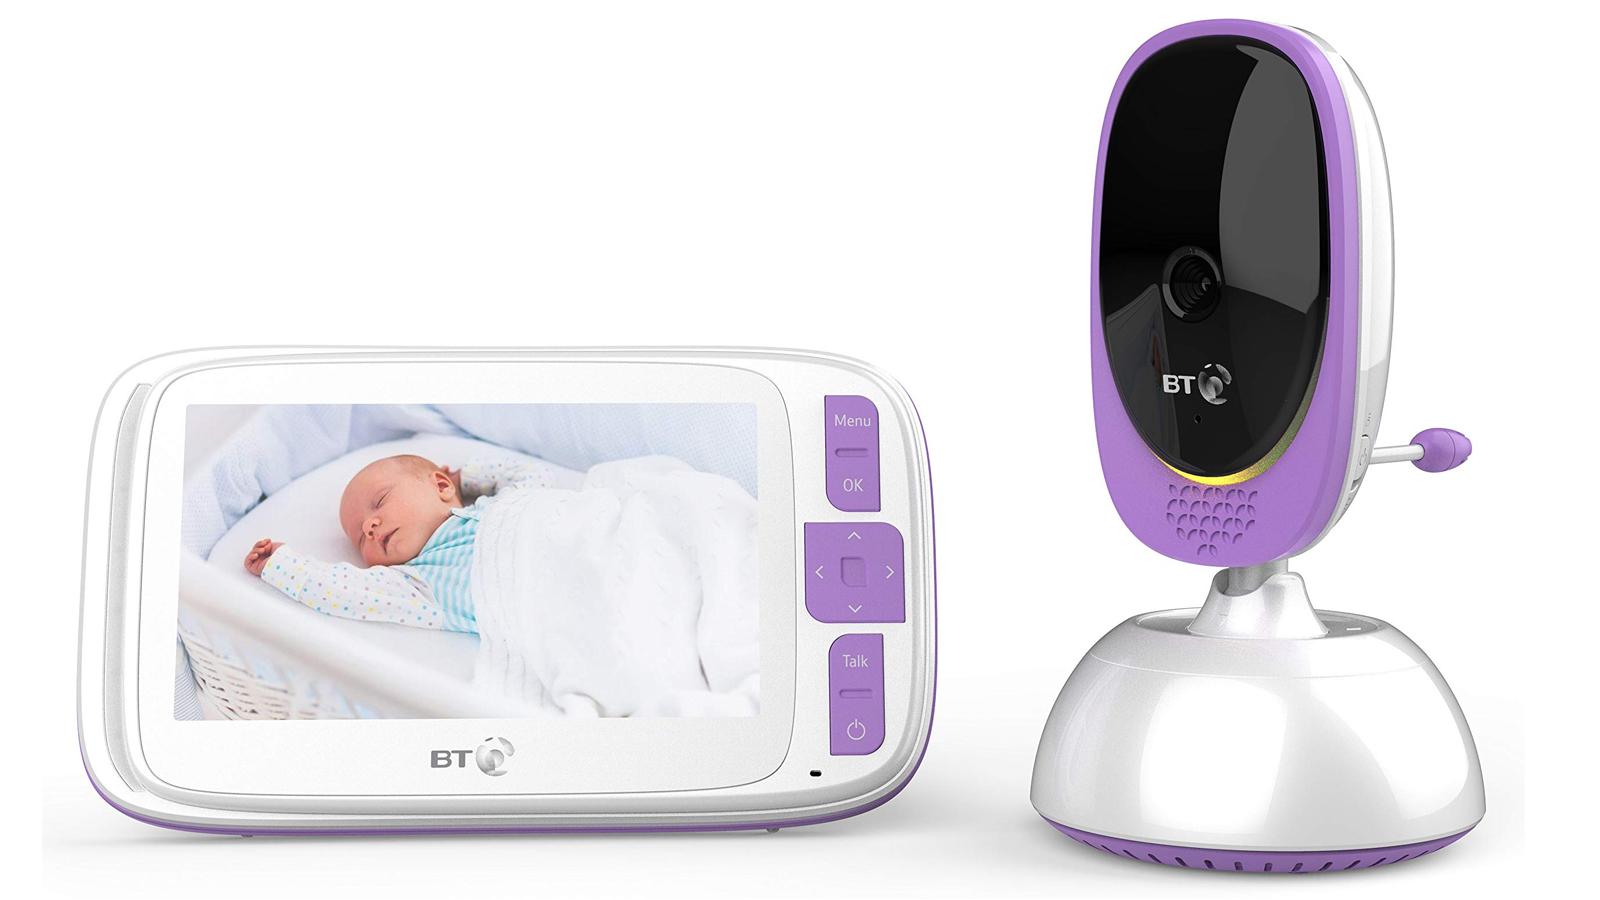  BT Smart Baby Monitor with 5in screen - Wi-Fi connectivity